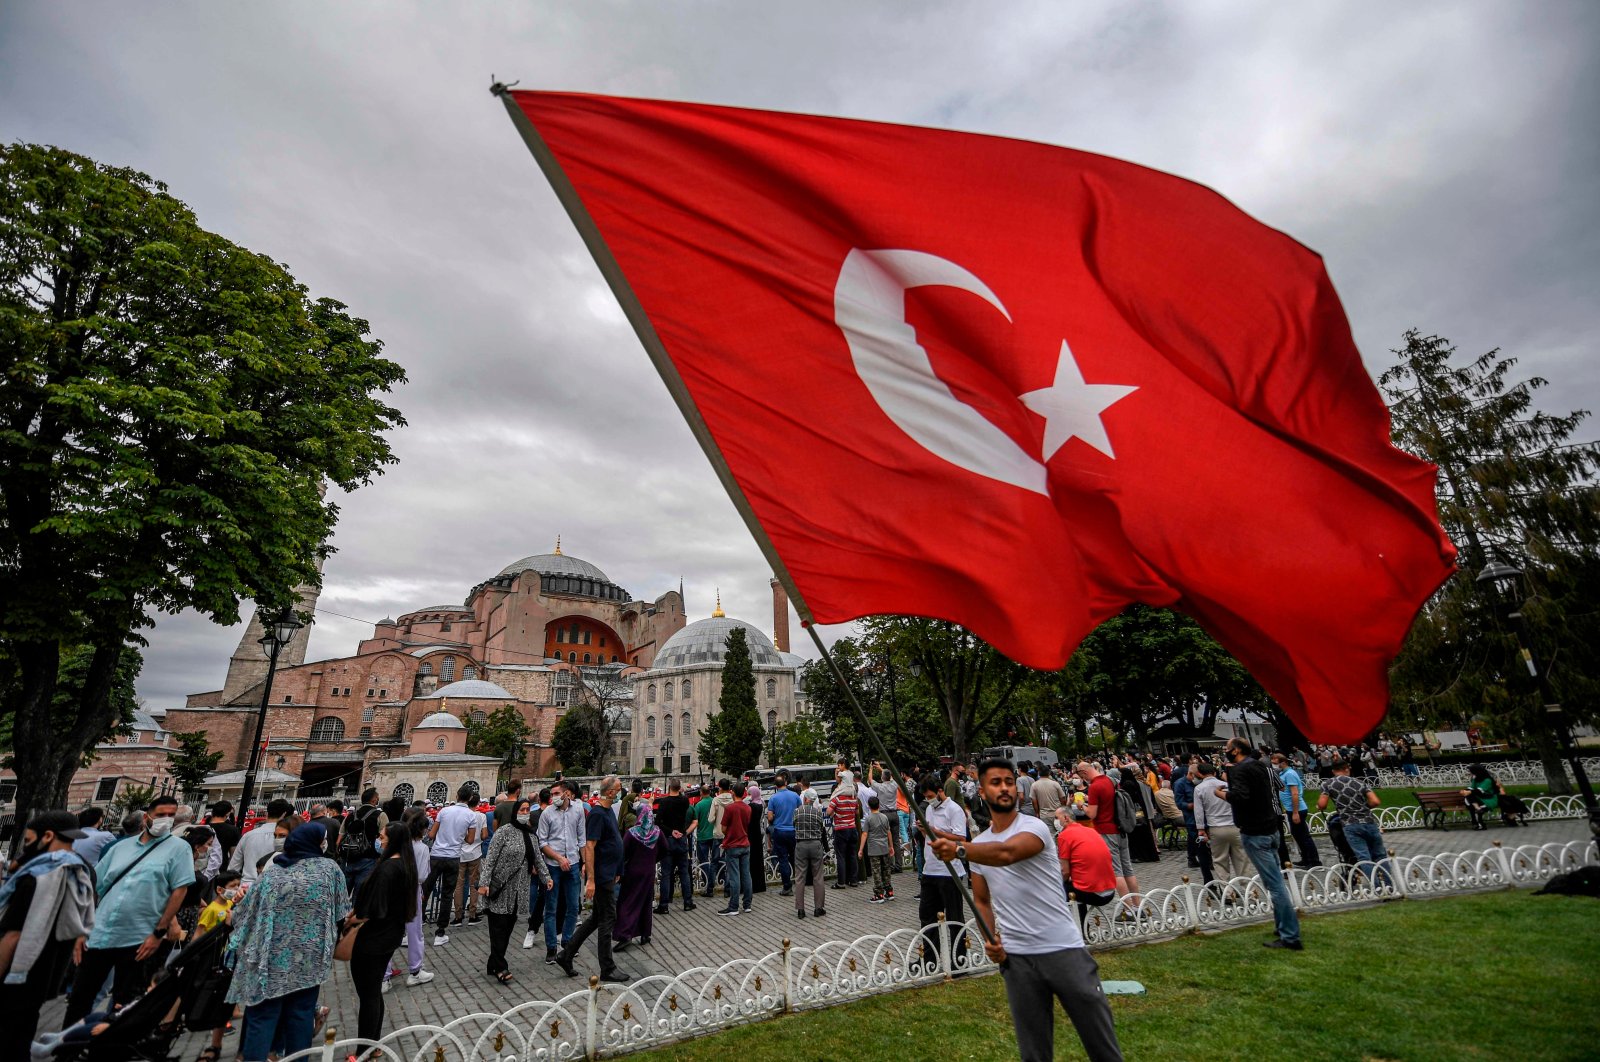 A man waves a Turkish national flag at Sultanahmet Square in front of Hagia Sophia during the fourth anniversary of the failed coup attempt in Istanbul, Turkey, July 15, 2020. (AFP)